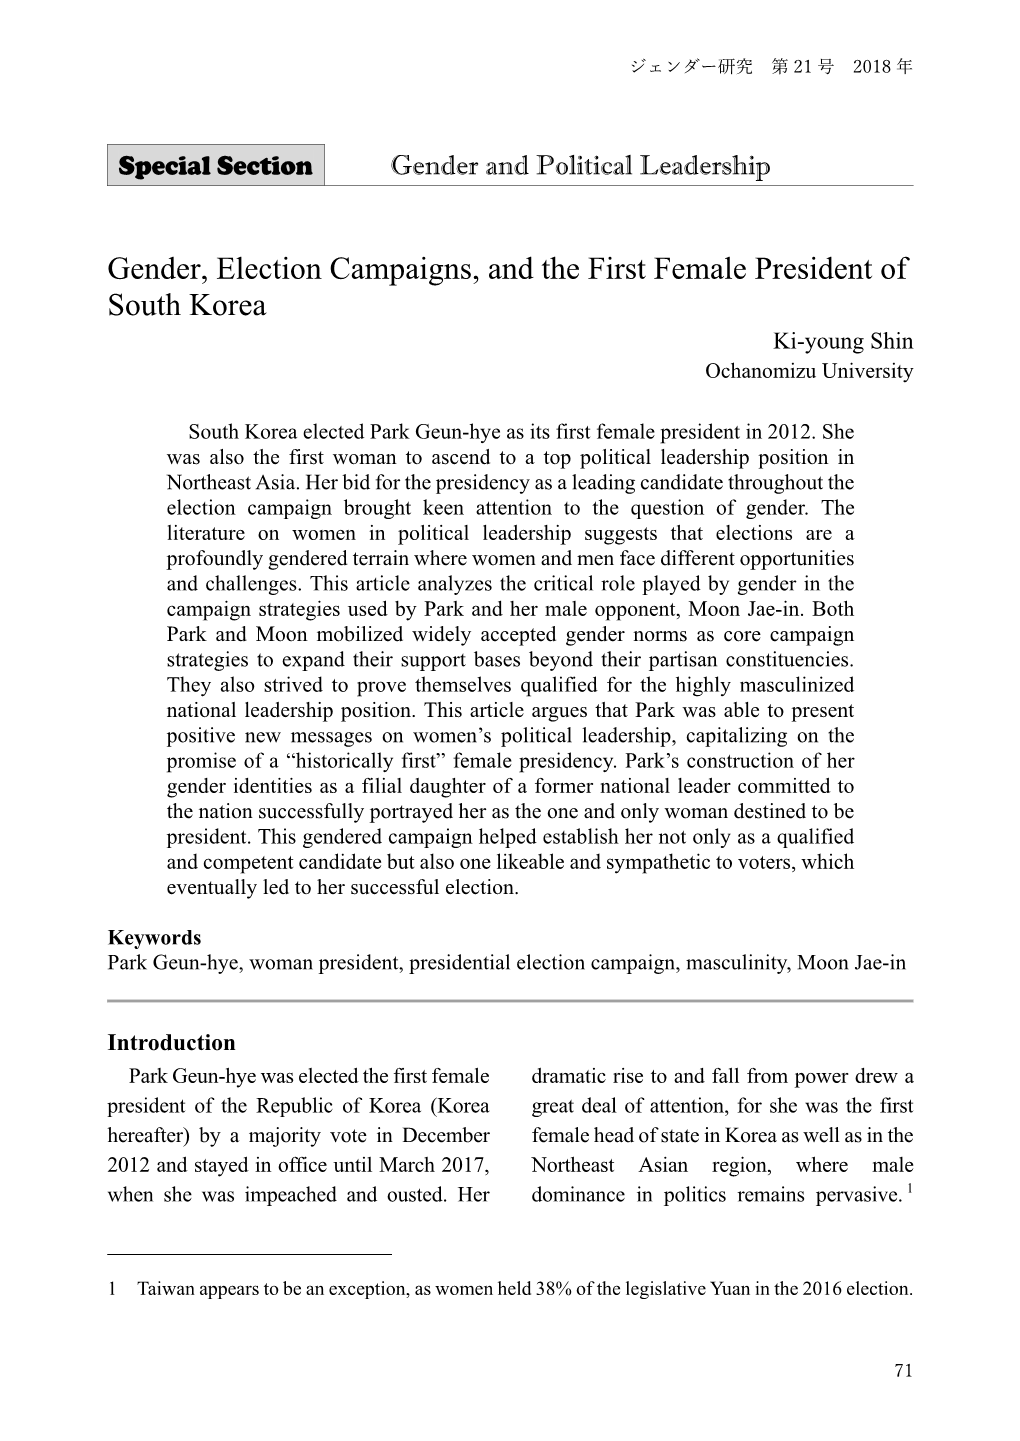 Gender, Election Campaigns, and the First Female President of South Korea Ki-Young Shin Ochanomizu University